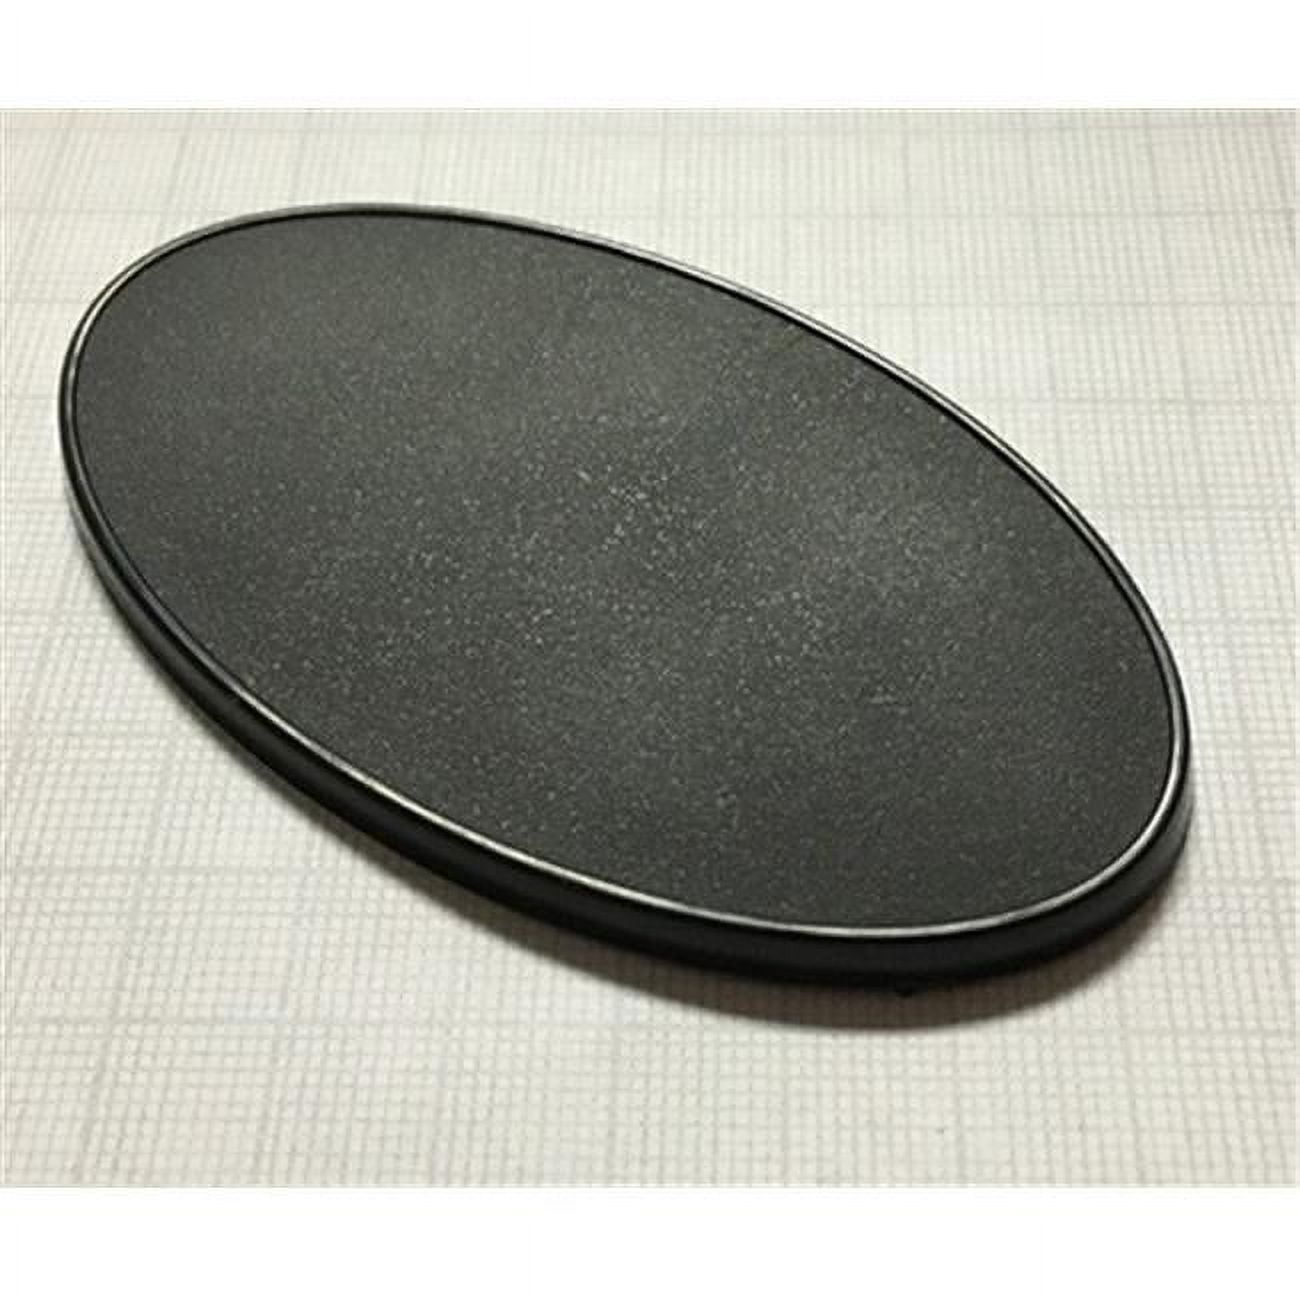 90 X 52 Mm Oval Gaming Base - Set Of 10